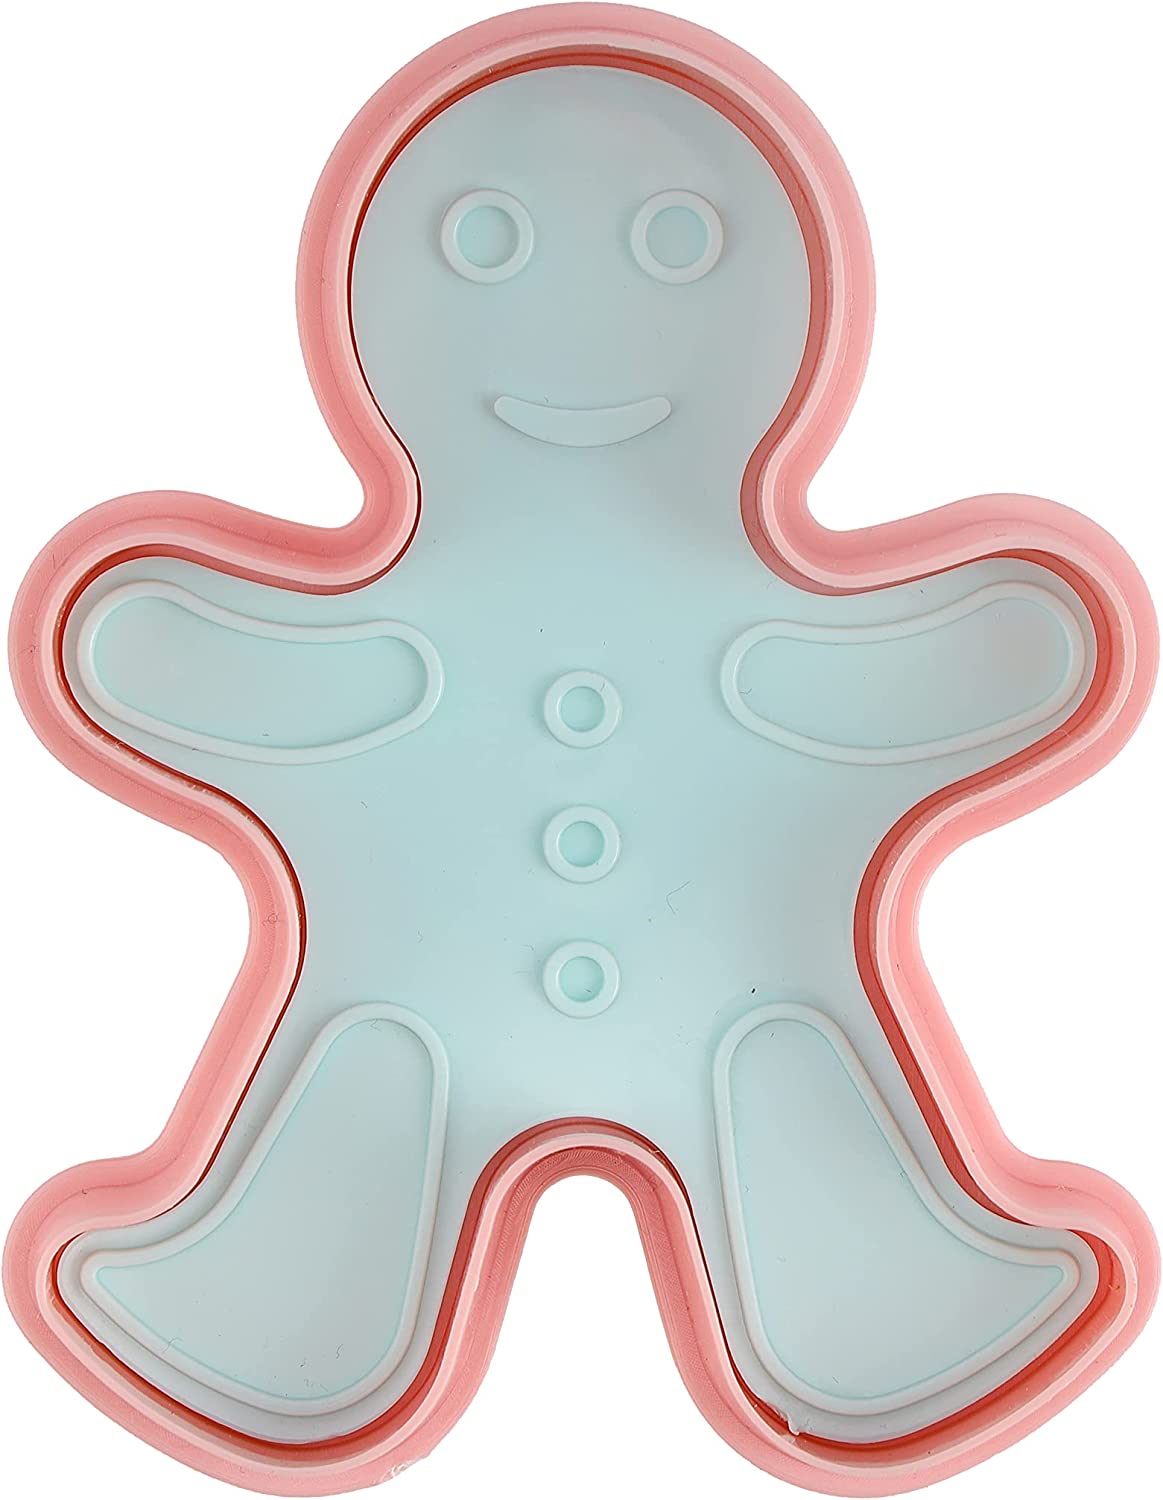 Royalford 2Pc Teddy Shaped Cookie Cutter1X36